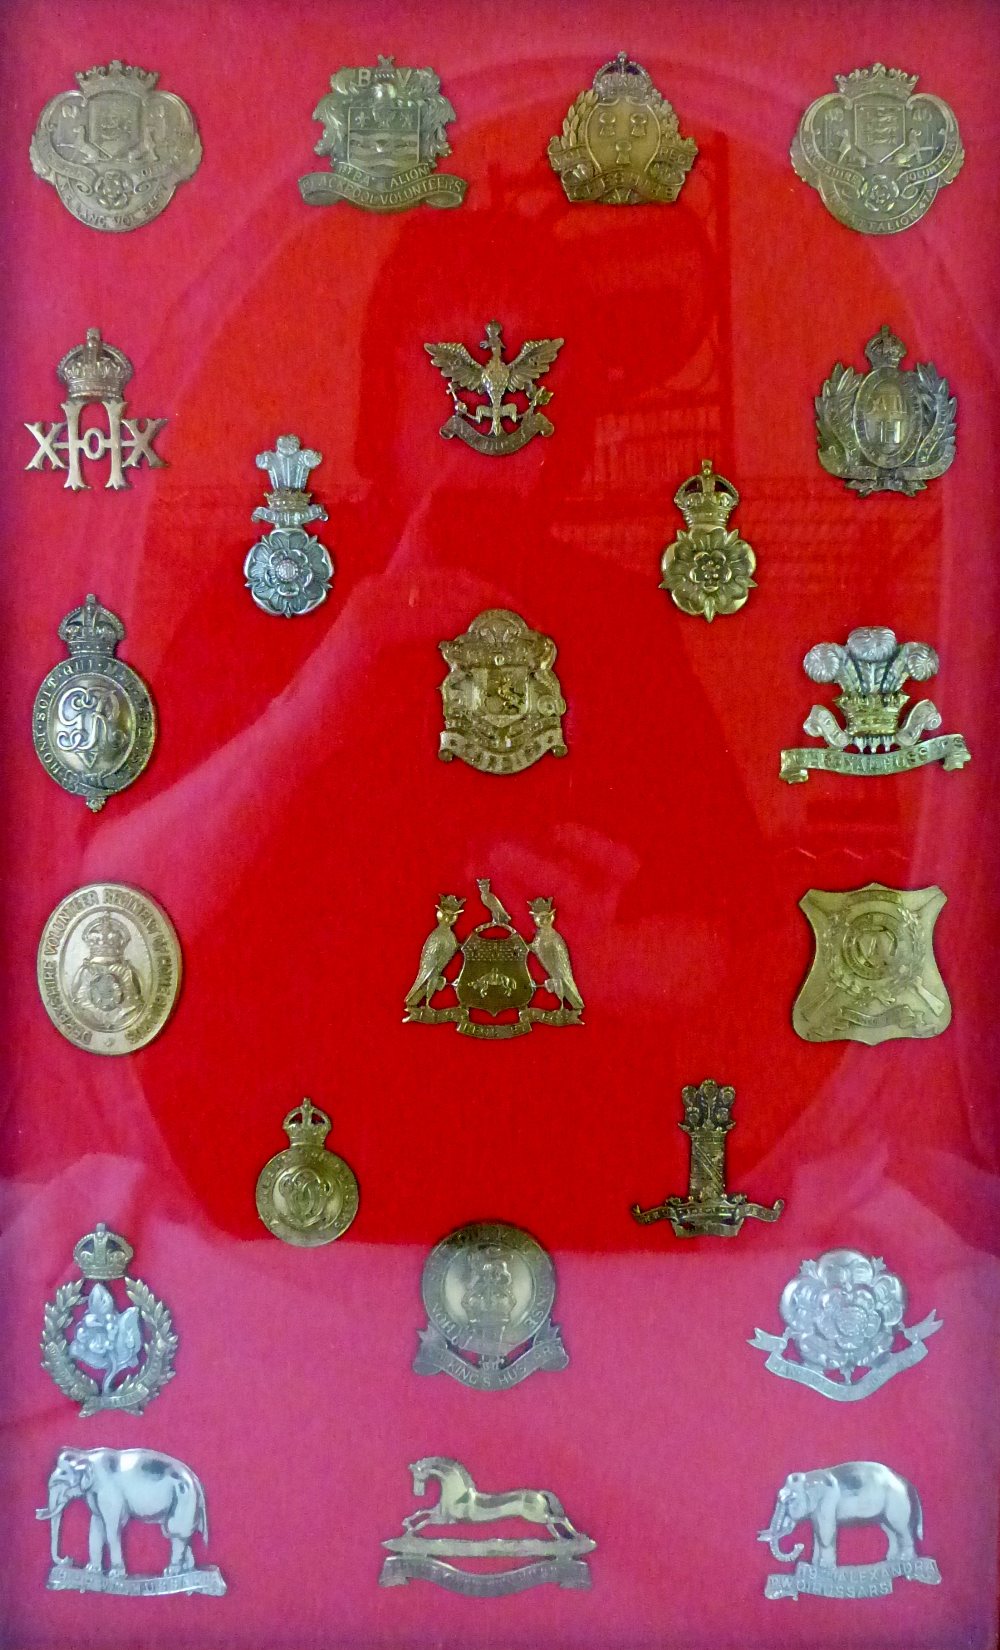 23 military cap badges including 14th Kings Hussars,